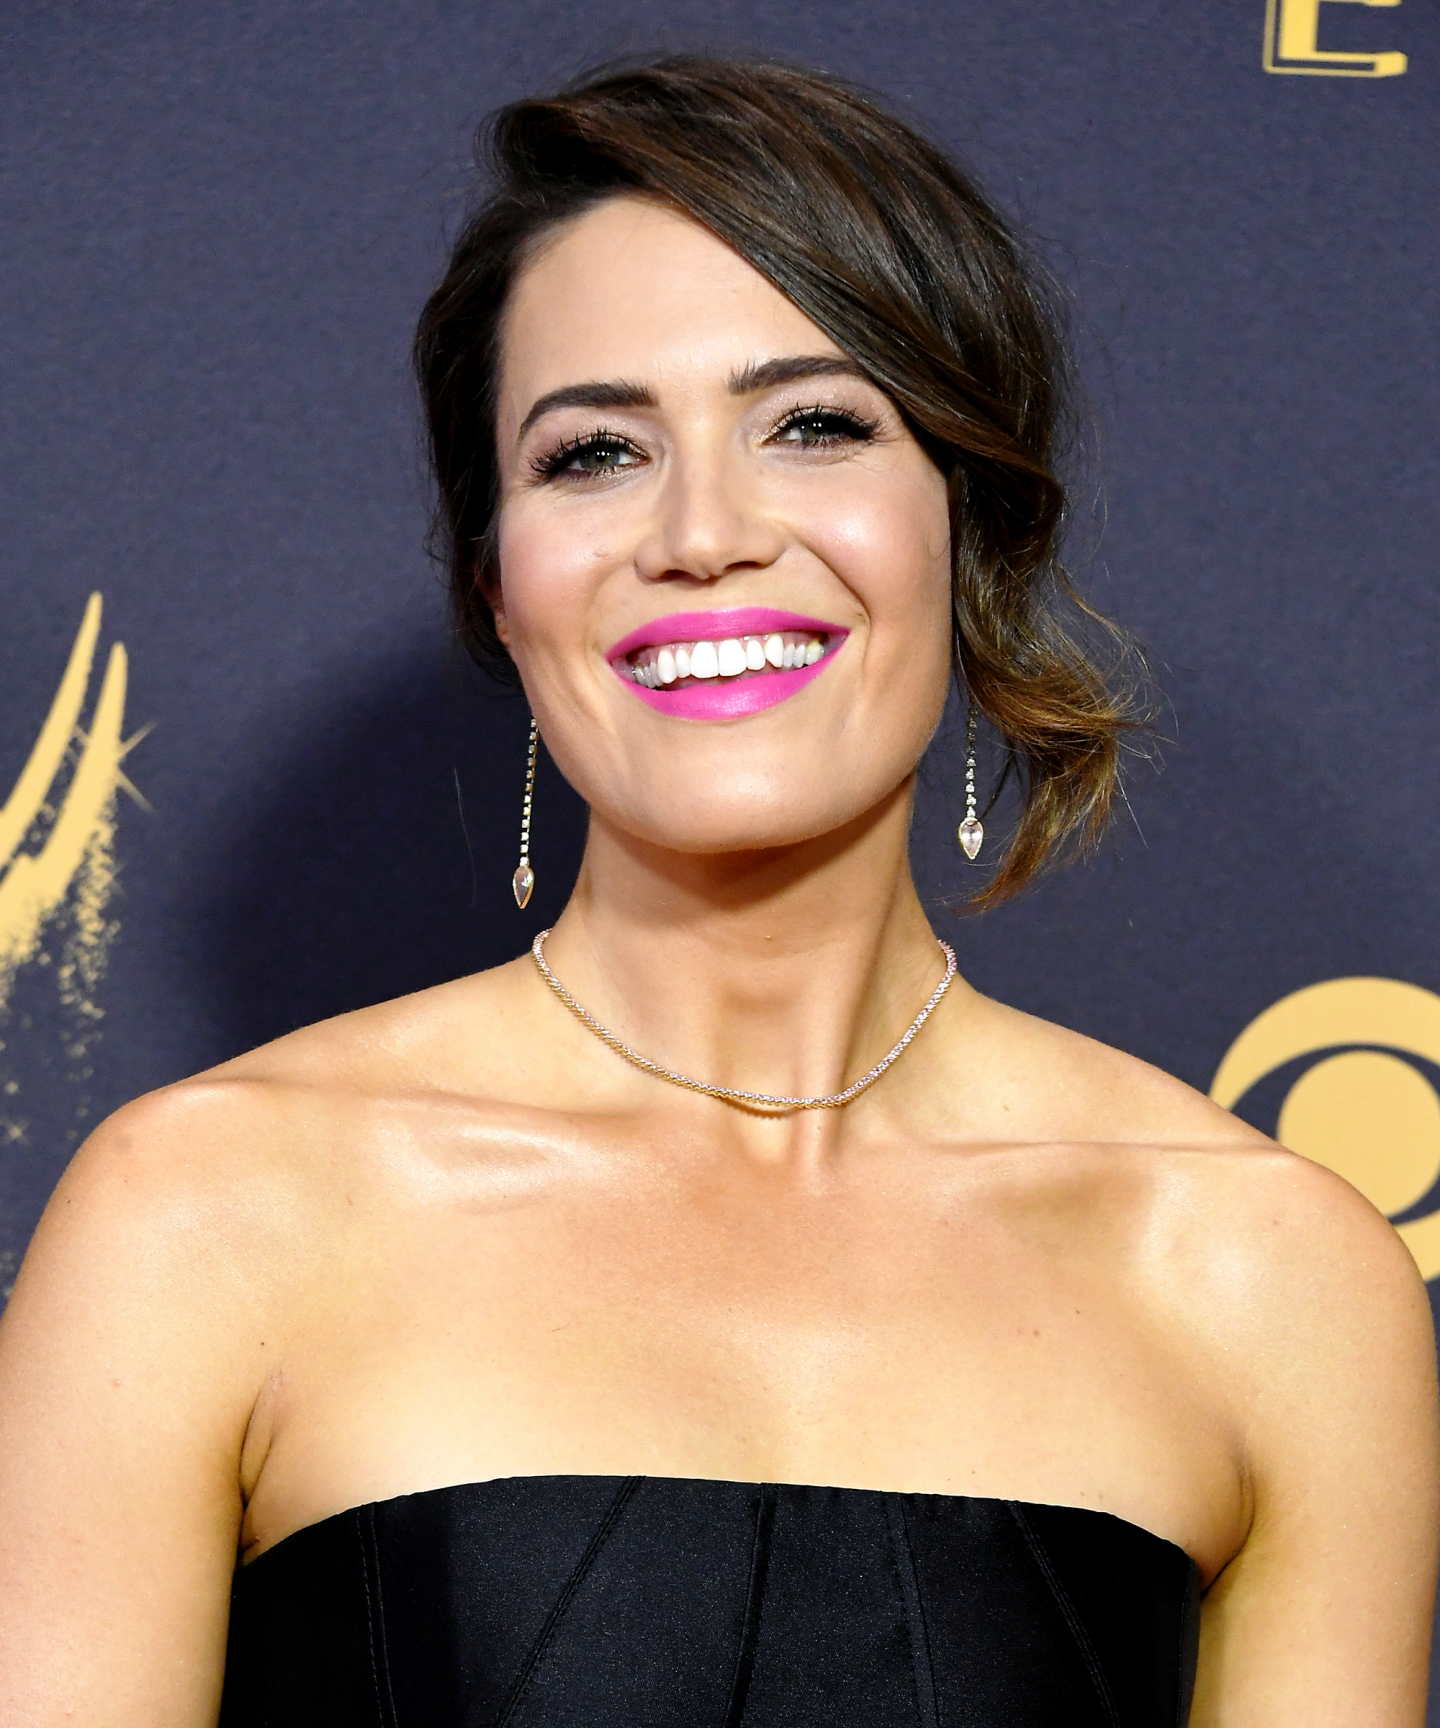 Mandy Moore at Emmys 2017 Getty images